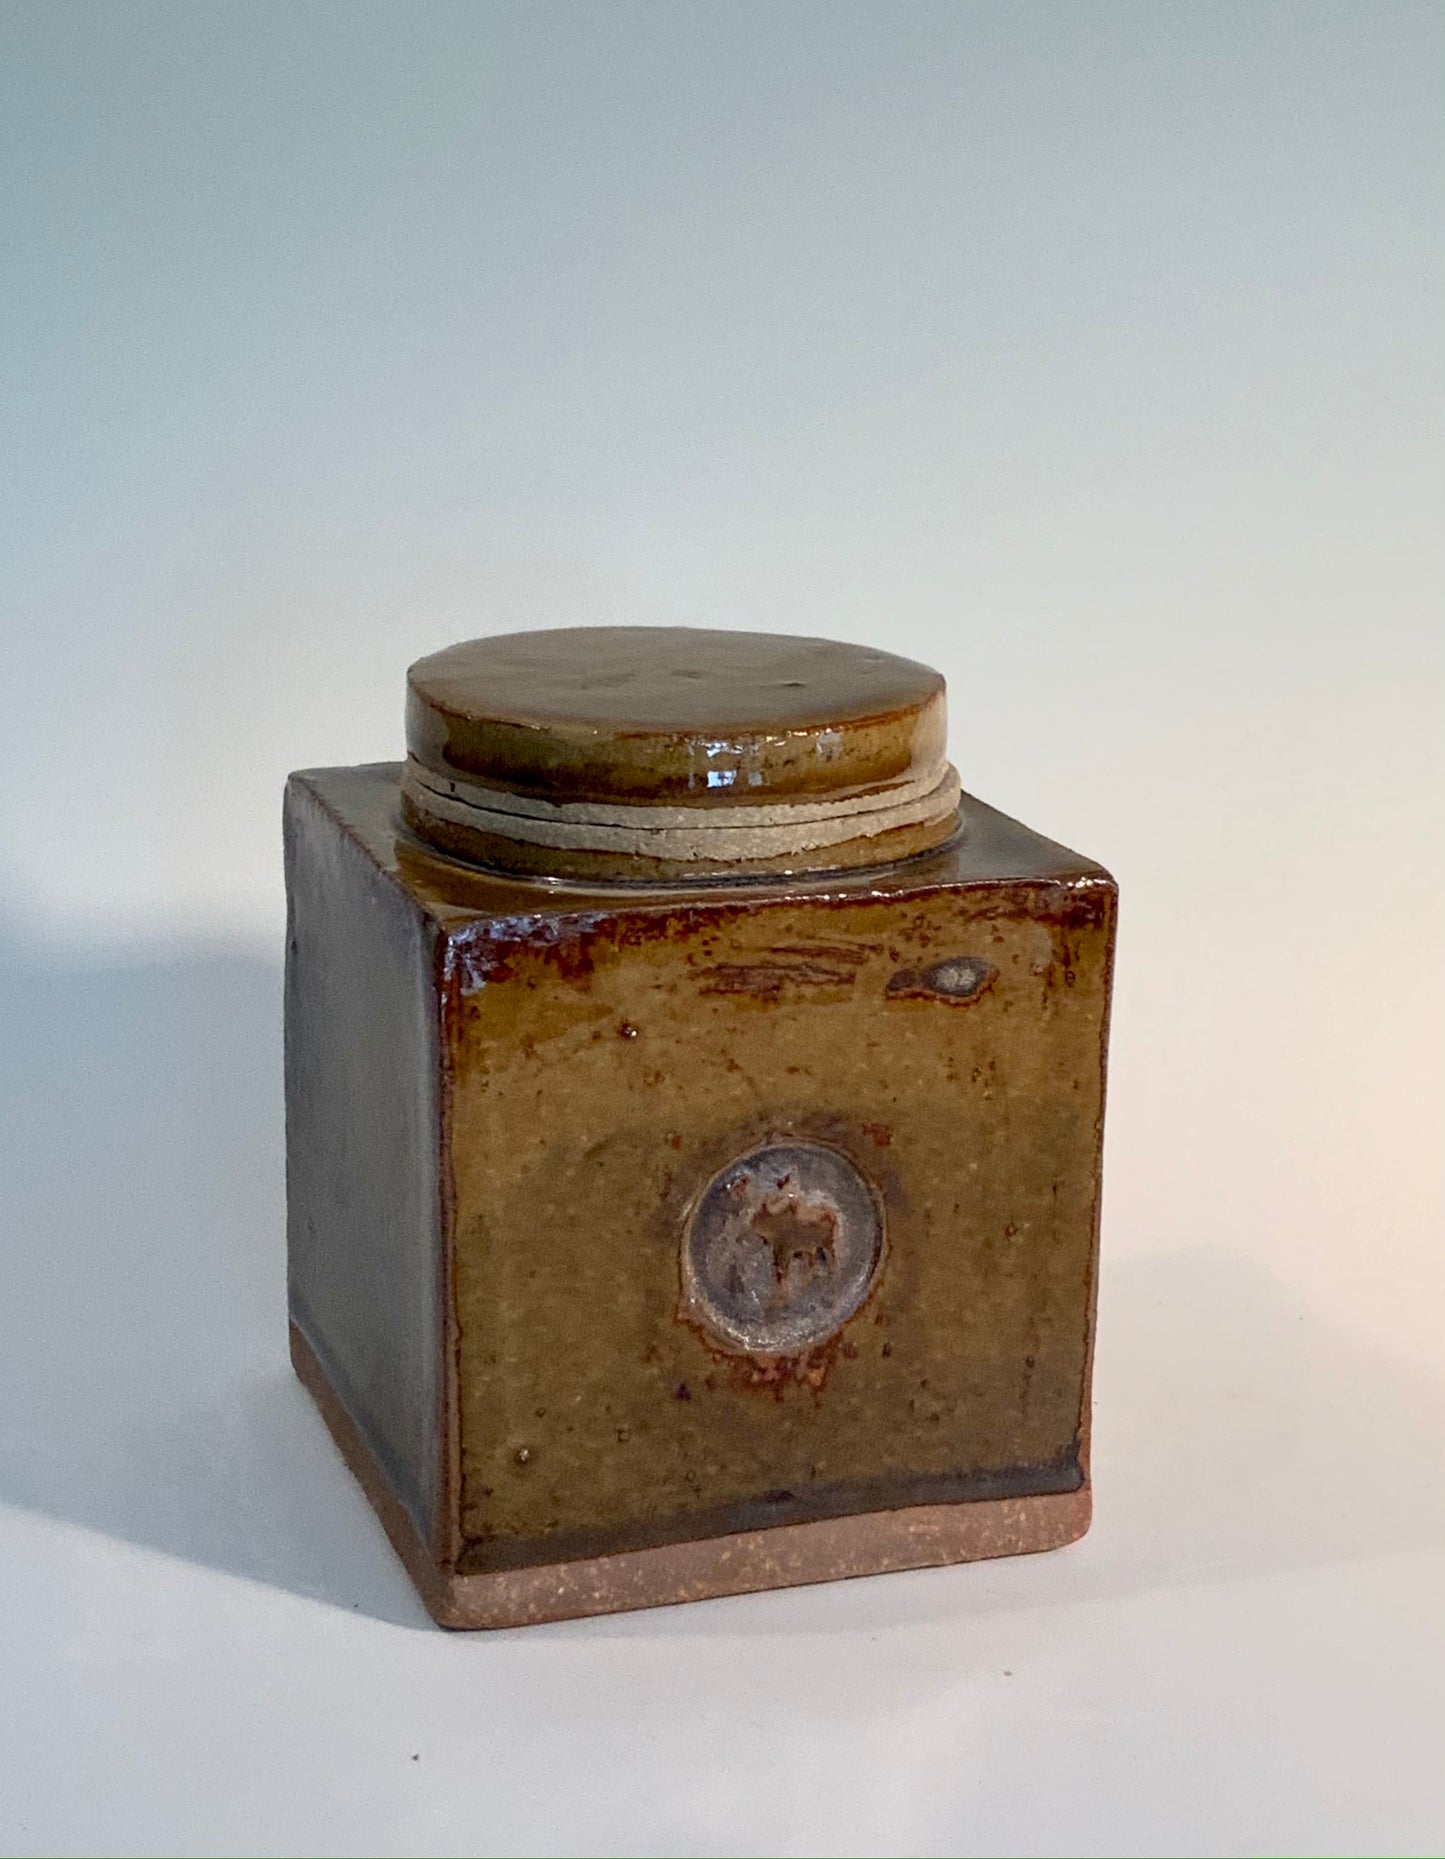 3.5" by 3.5" square jar with one moose stamp. round lid